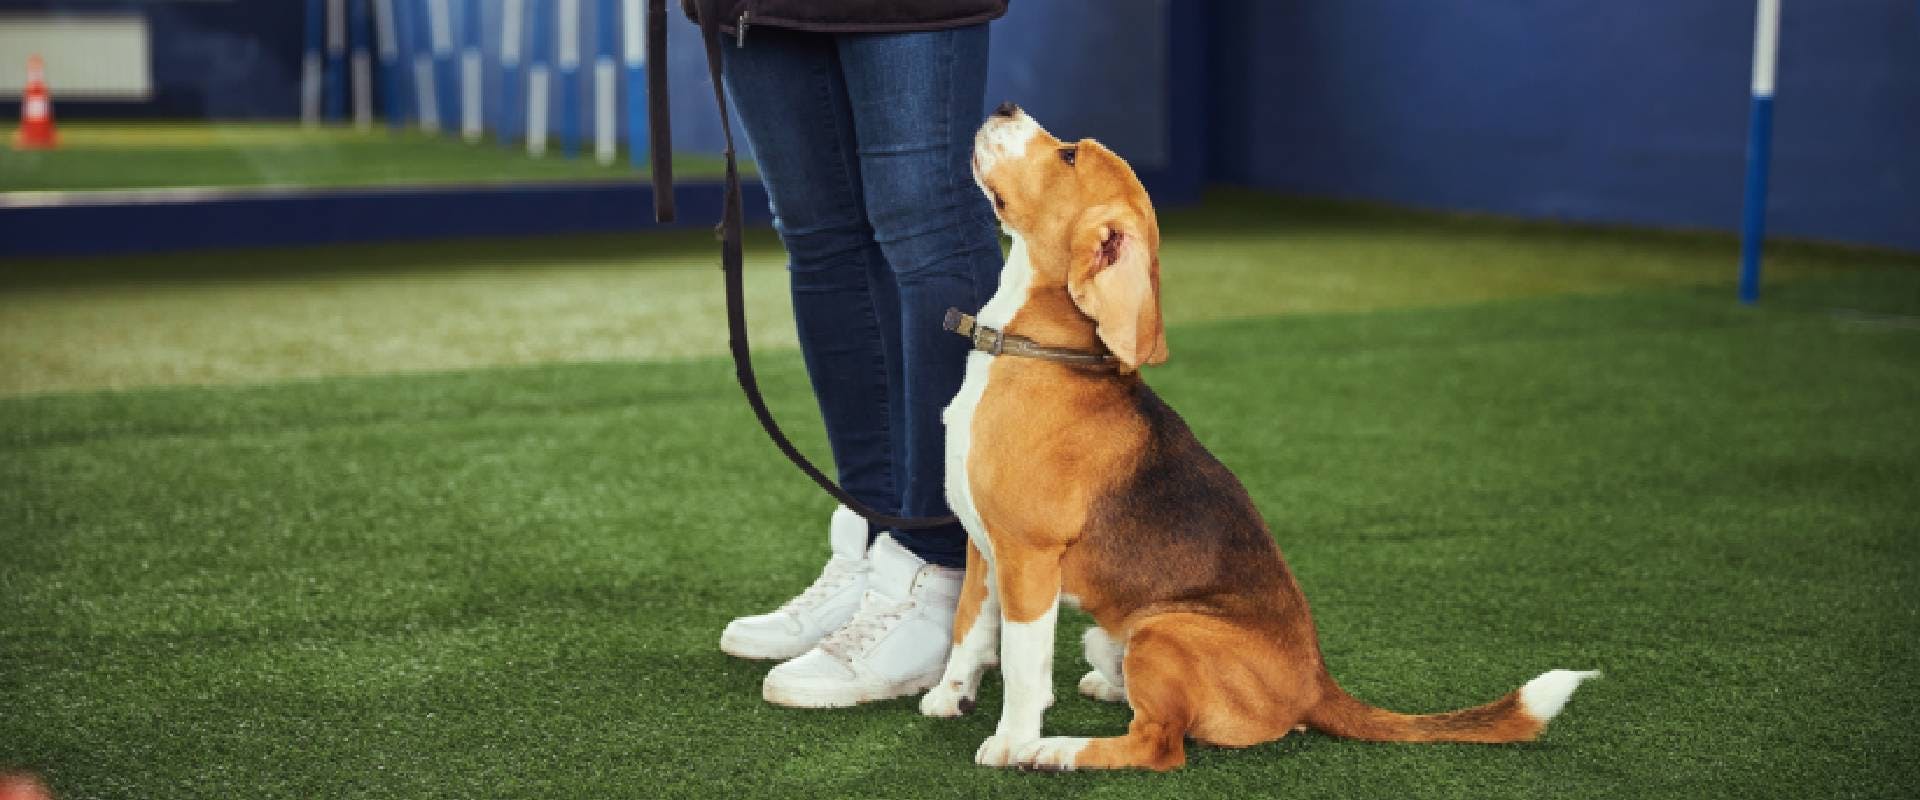 Beagle responding to command at a dog obedience training class